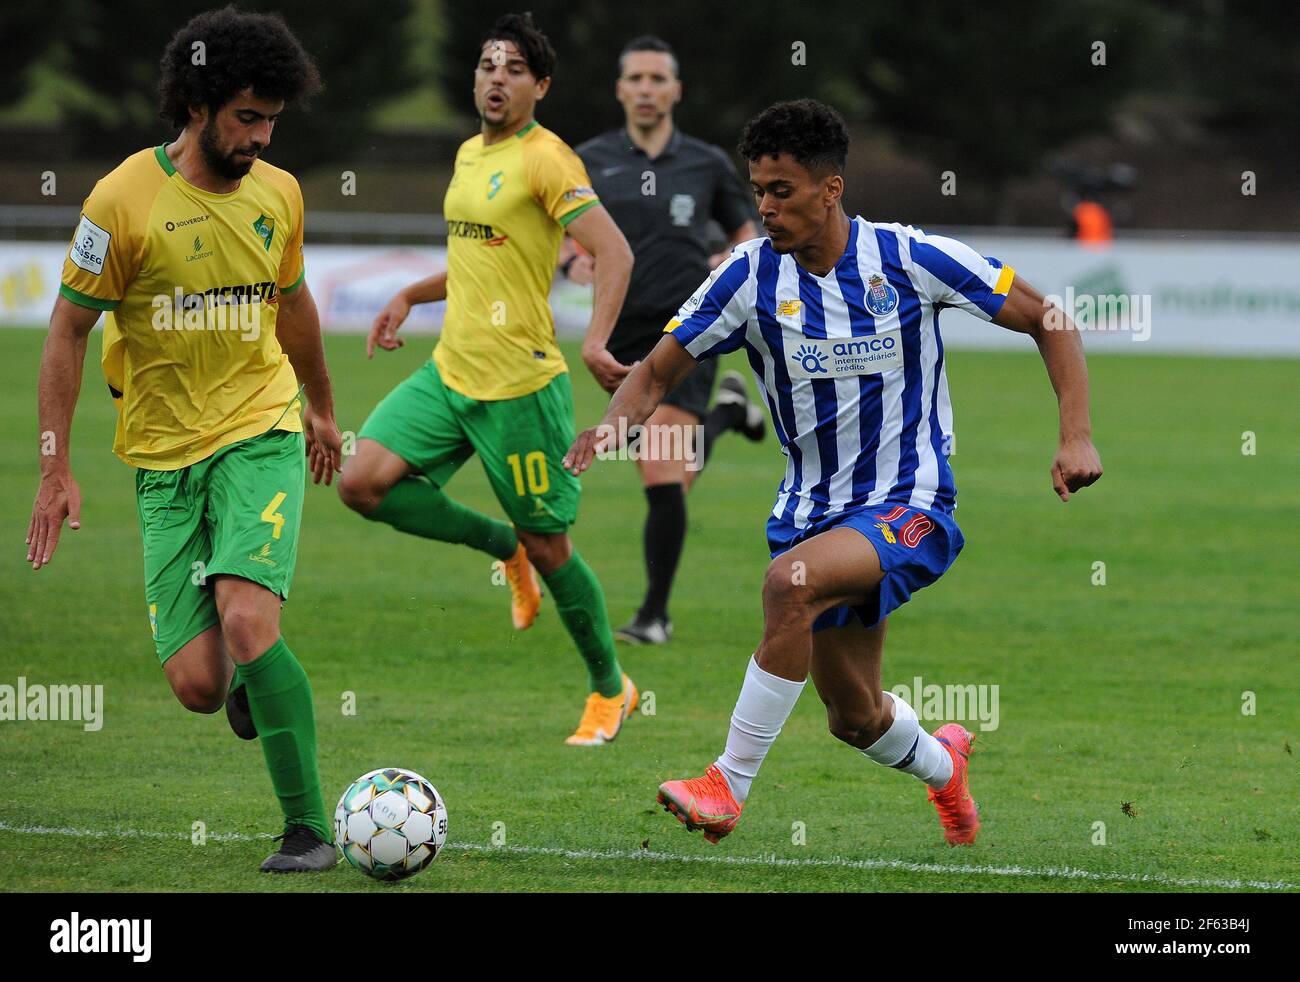 Mafra, 03/29/2021 - CD Mafra hosted FC Porto B this afternoon at the Mafra  Municipal Stadium in Mafra, in a game counting for the 26th Journey of the  Second League 2020/21. Gonçalo